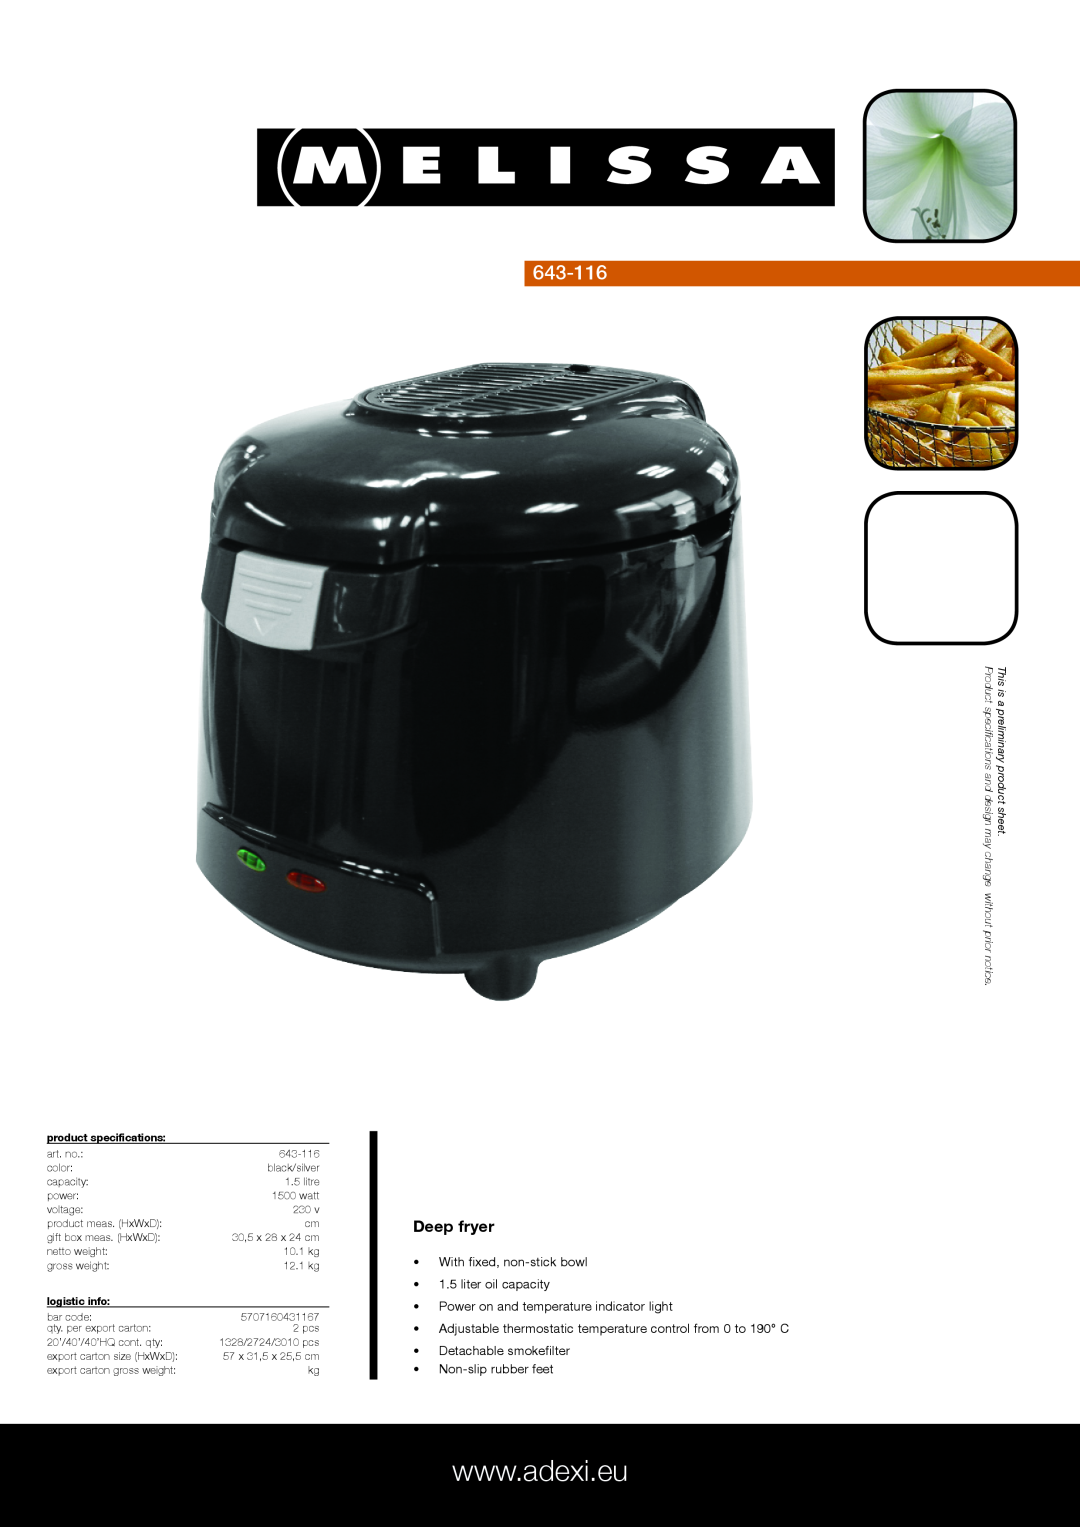 Melissa 643-116 specifications Deep fryer, With fixed, non-stickbowl, liter oil capacity, product specifications, Product 